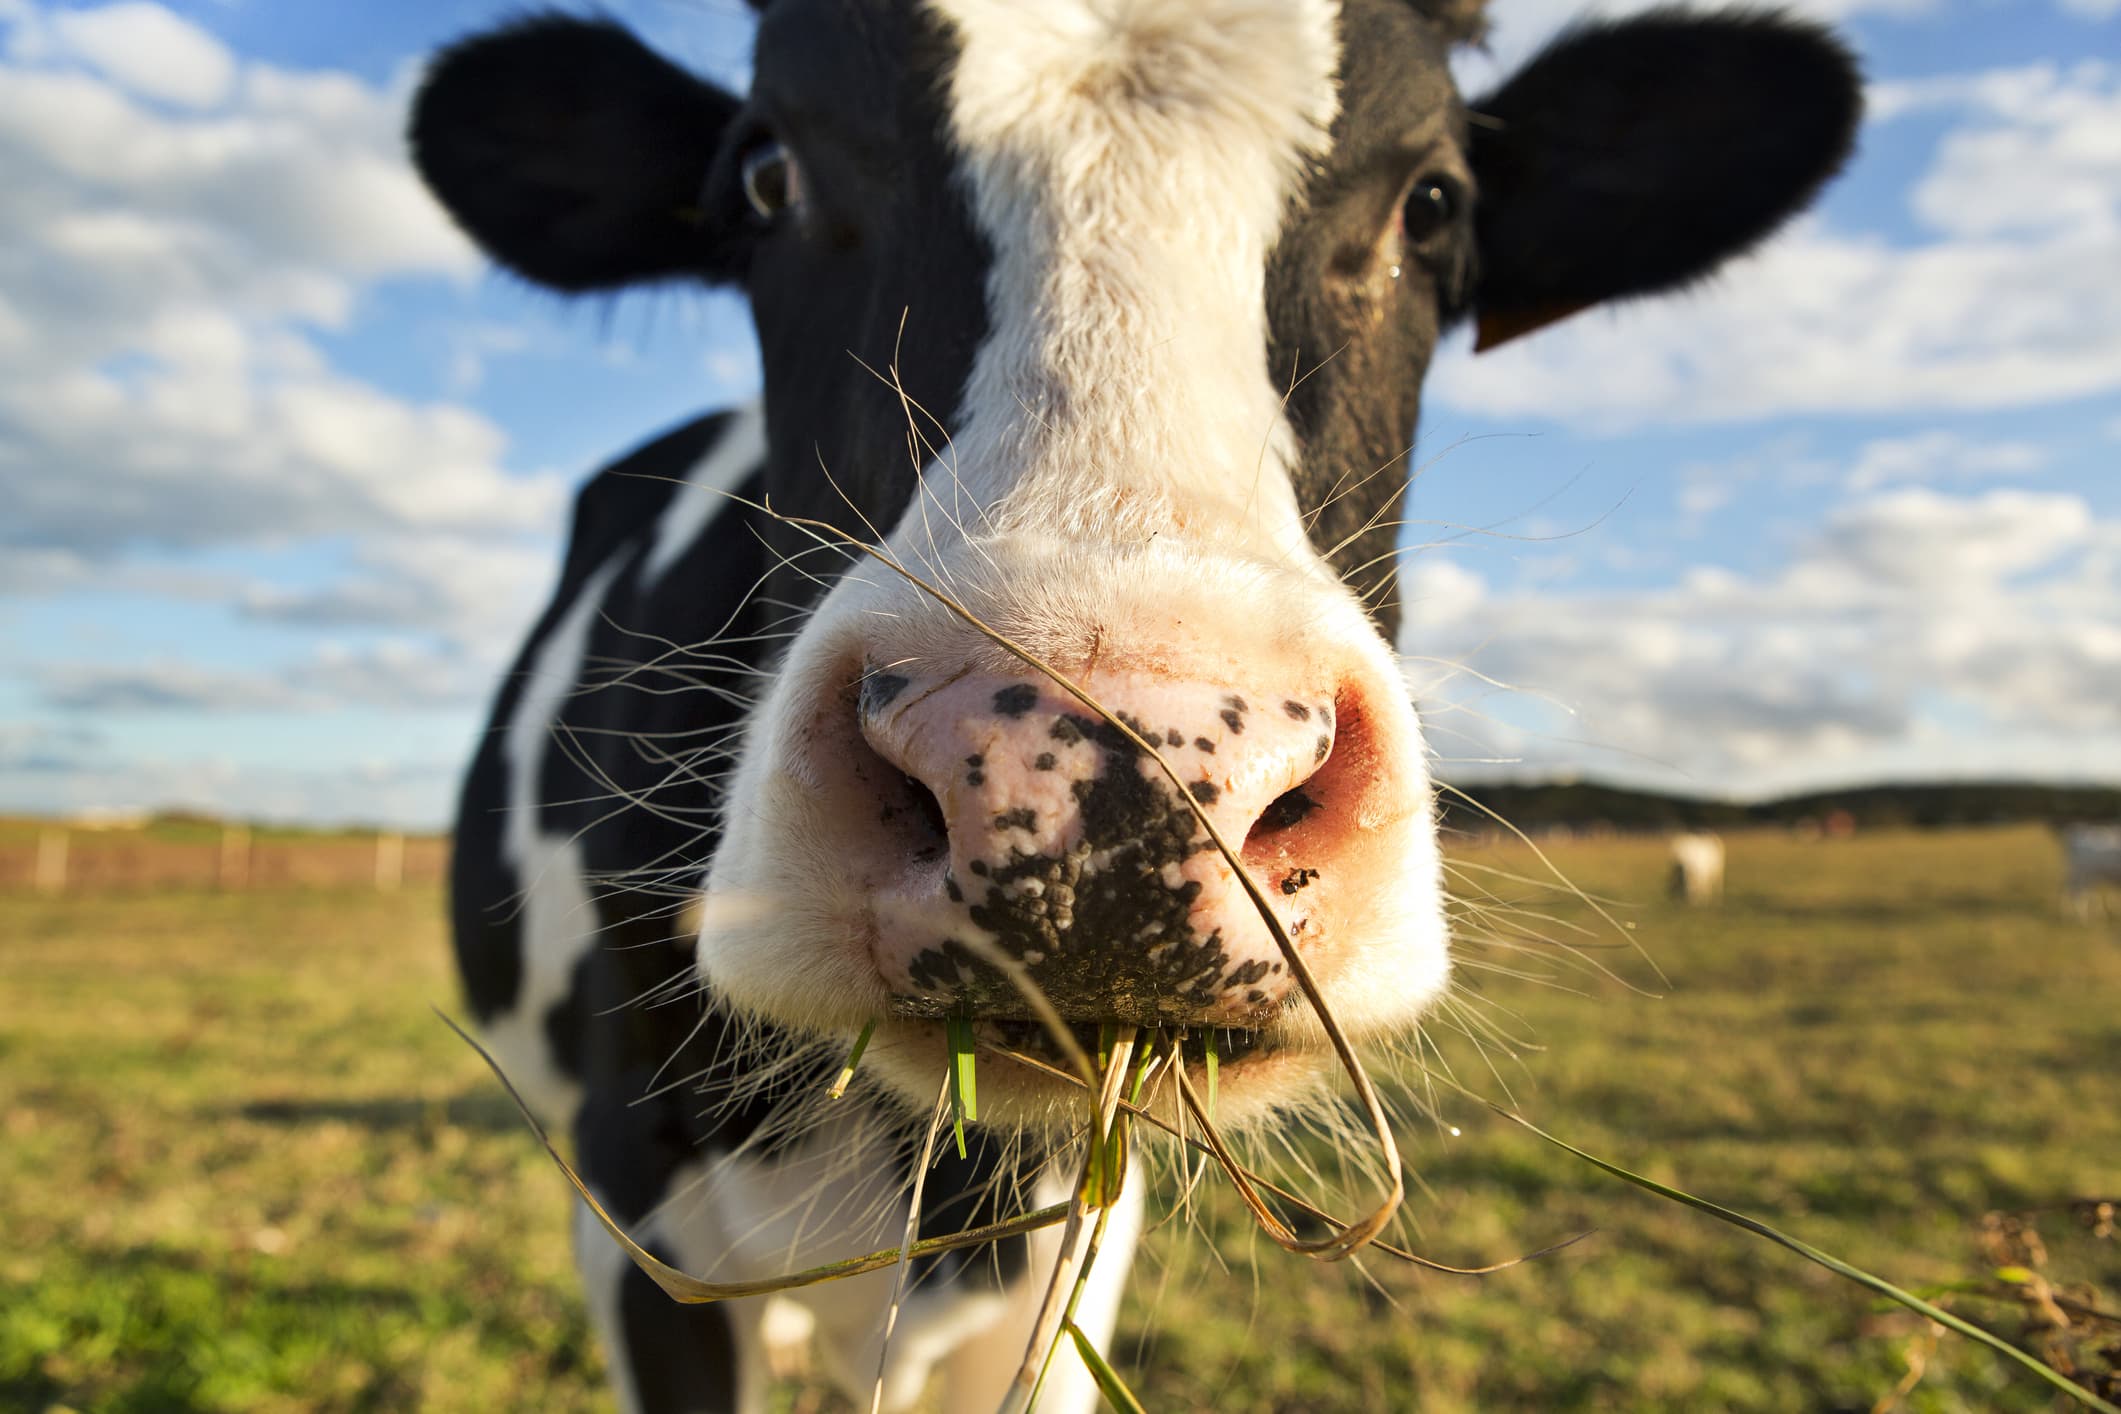 Covid and 'peak cow' created a boom for food and agriculture tech in 2020